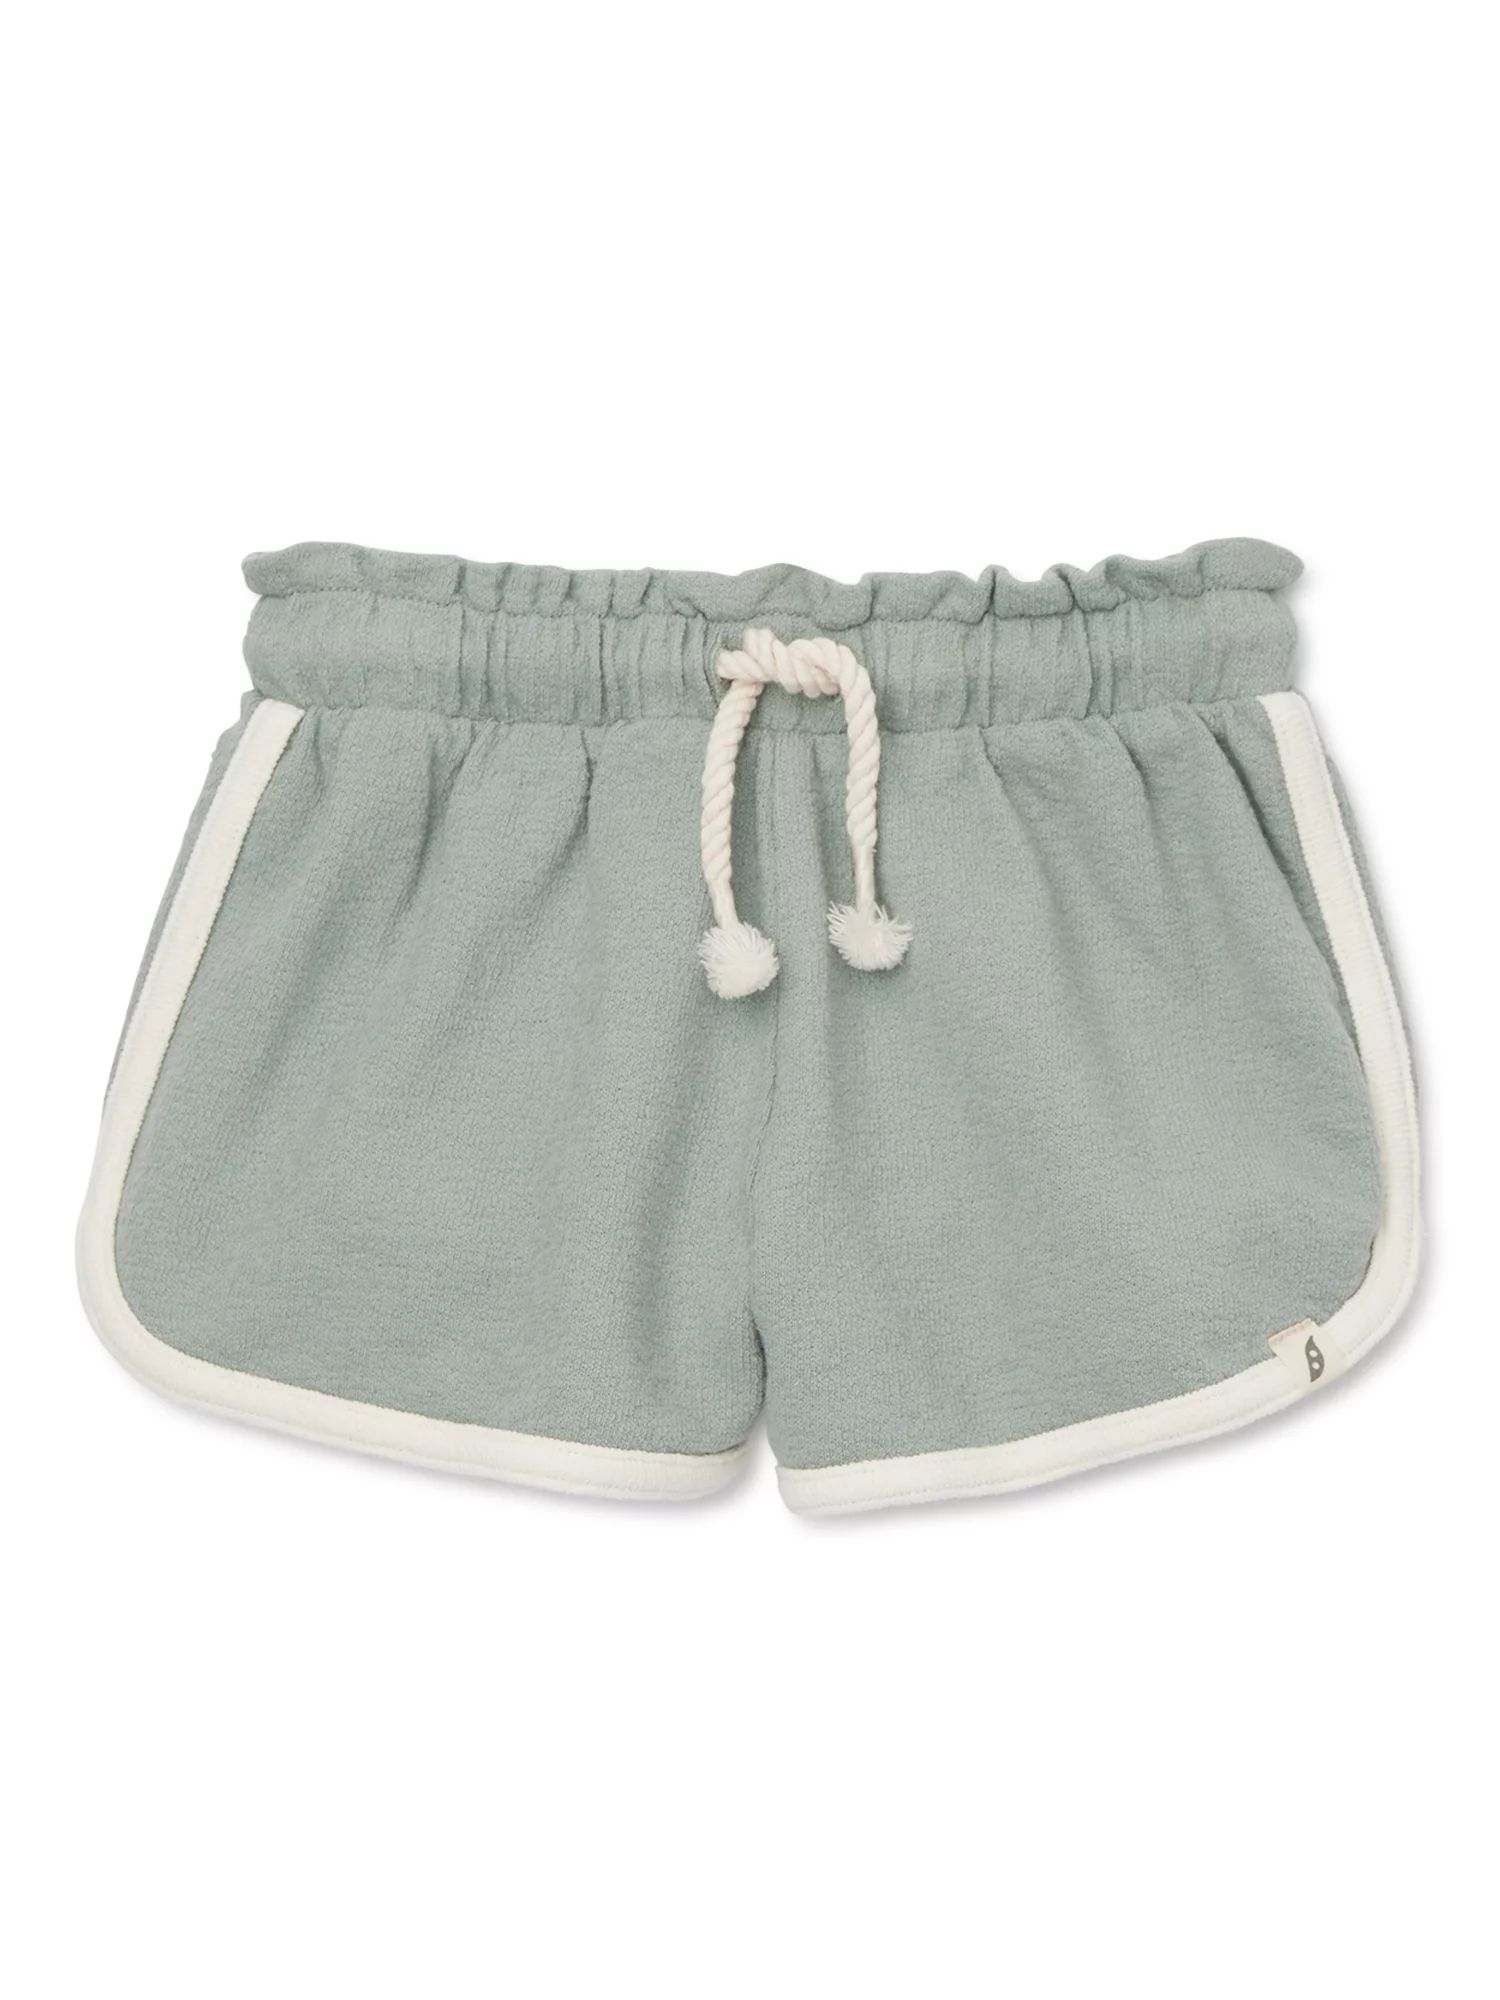 easy-peasy Toddler Girl Knit Dolphin Shorts, Sizes 12M-5T | Walmart (US)